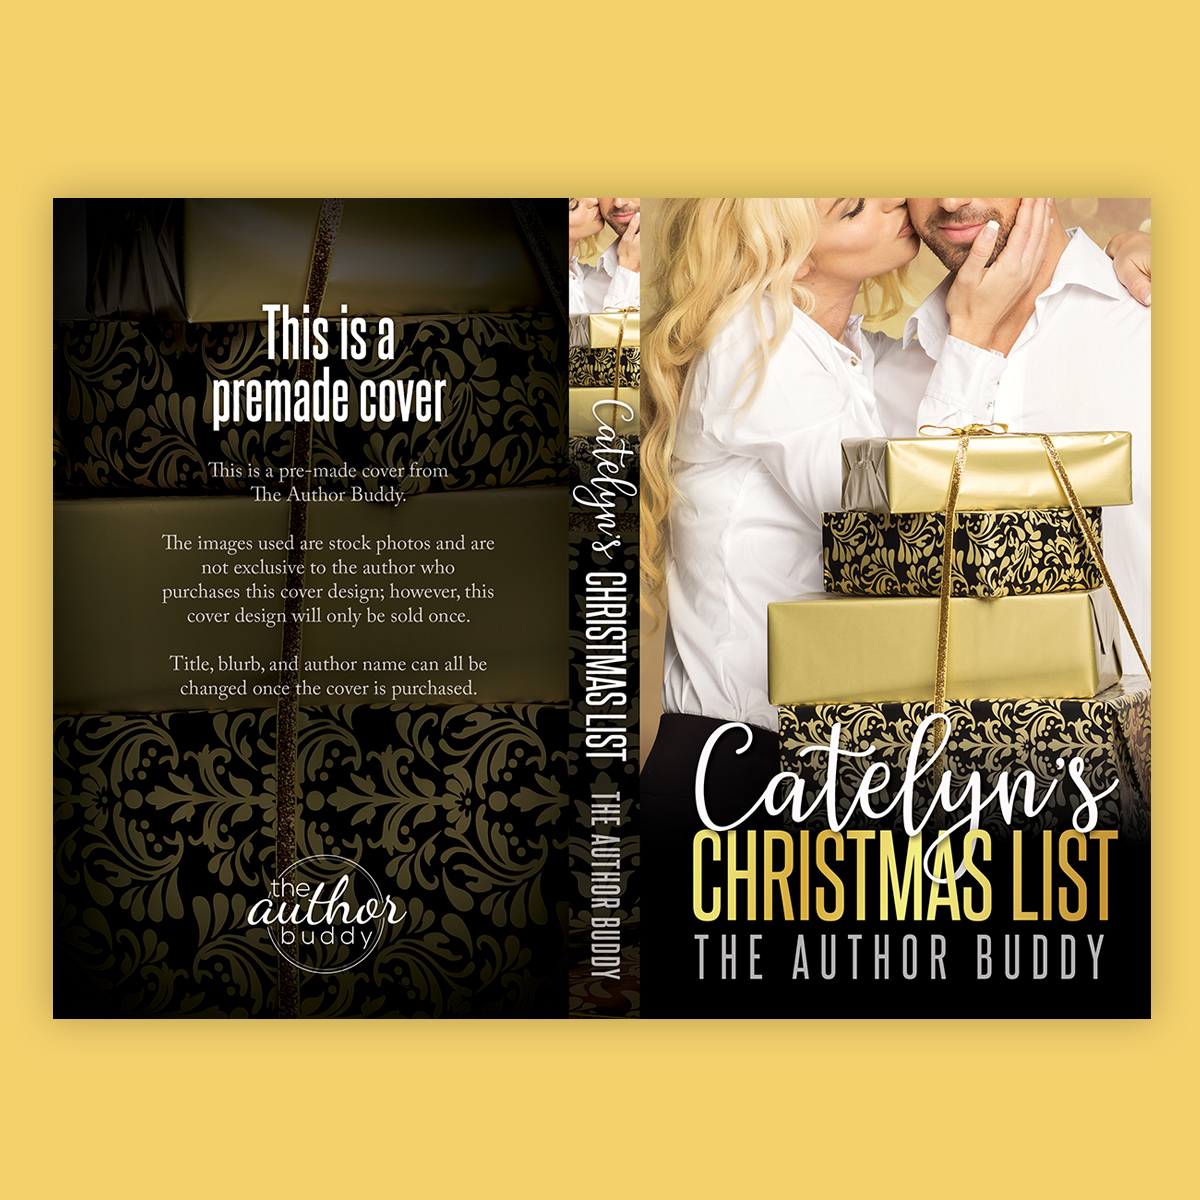 Catelyn's Christmas List - Premade Holiday Book Cover from The Author Buddy